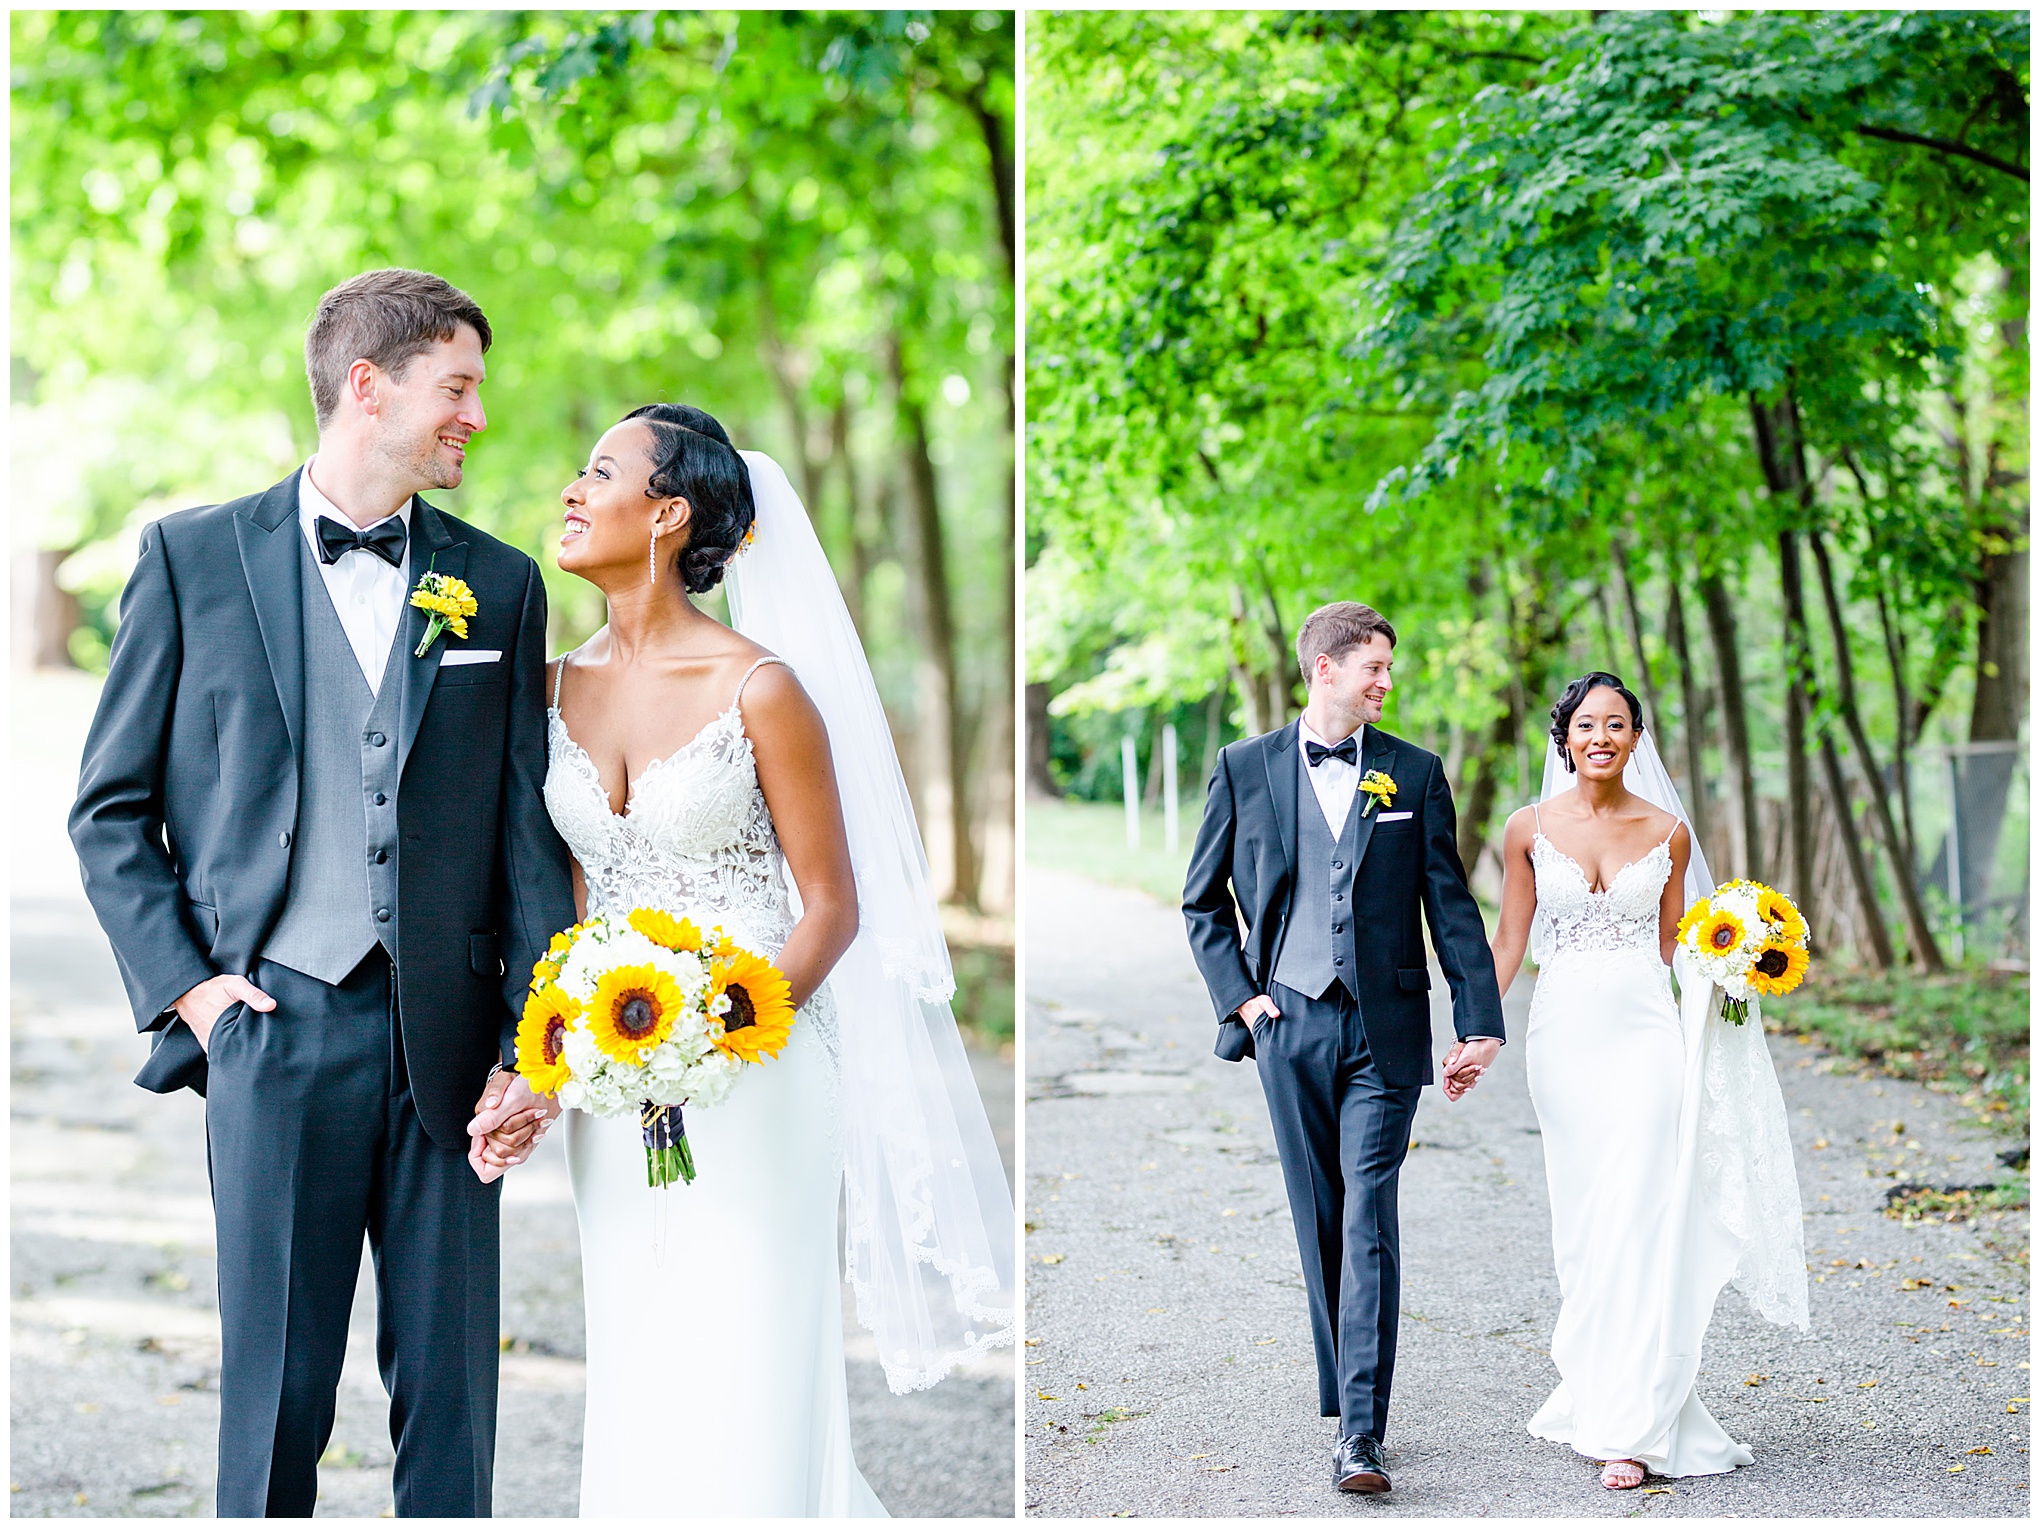 summer mansion at valley country club wedding, Maryland wedding, MD wedding, Maryland wedding photographer, summer wedding, summer wedding inspiration, Baltimore wedding photographer, DC wedding photographer, country club wedding, yellow aesthetic, Rachel E.H. Photography, sunflower bouquet